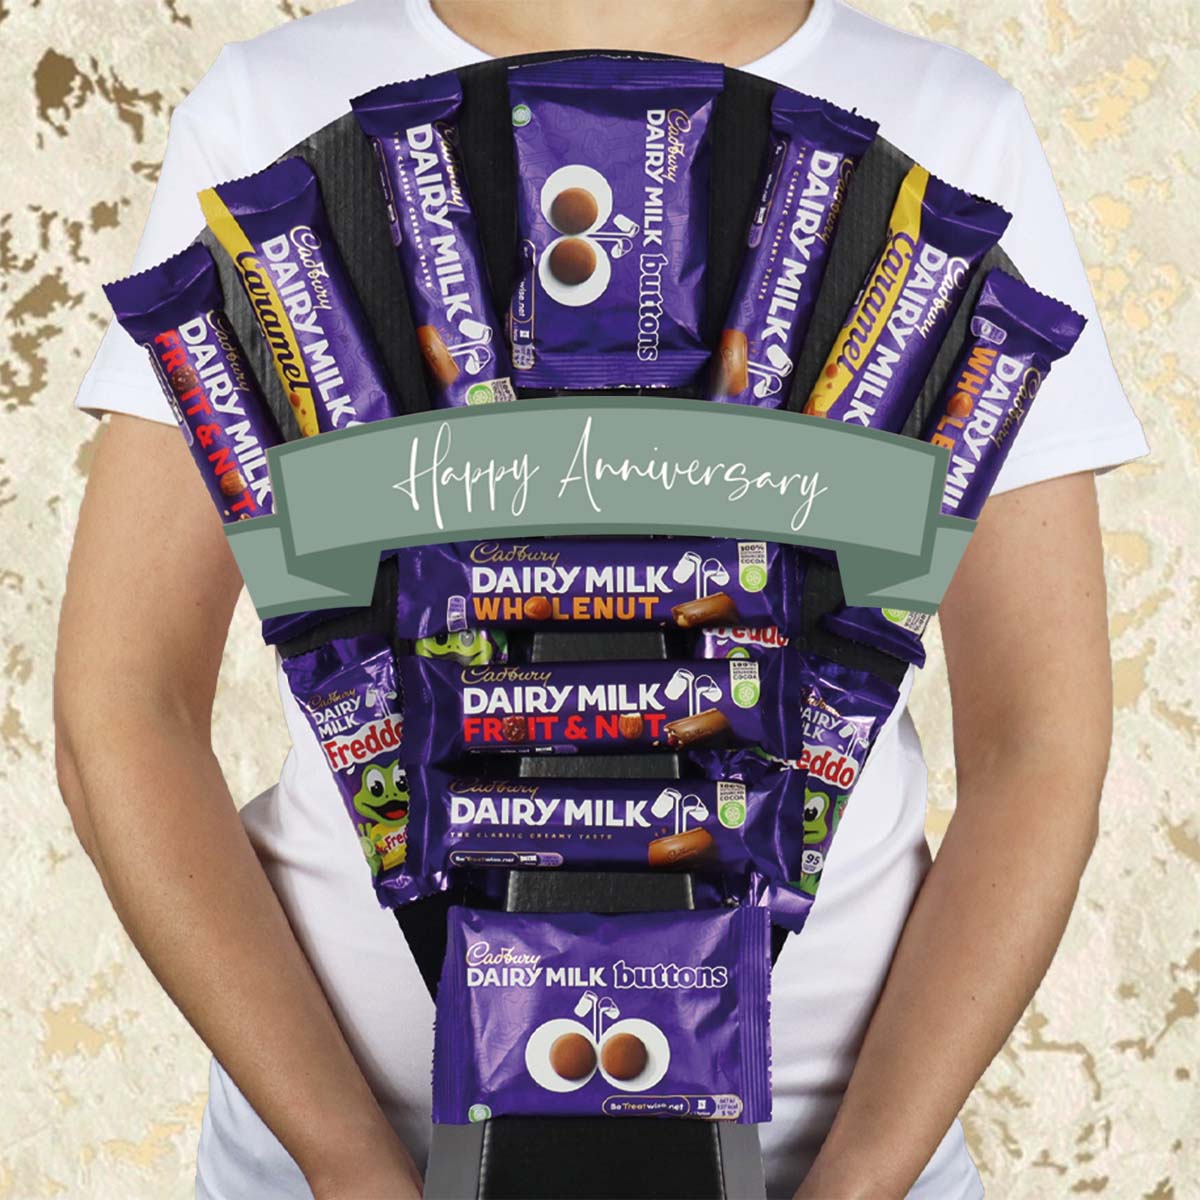 Dairy Milk Selection Happy Anniversary Chocolate Bouquet - Perfect Anniversary Gift